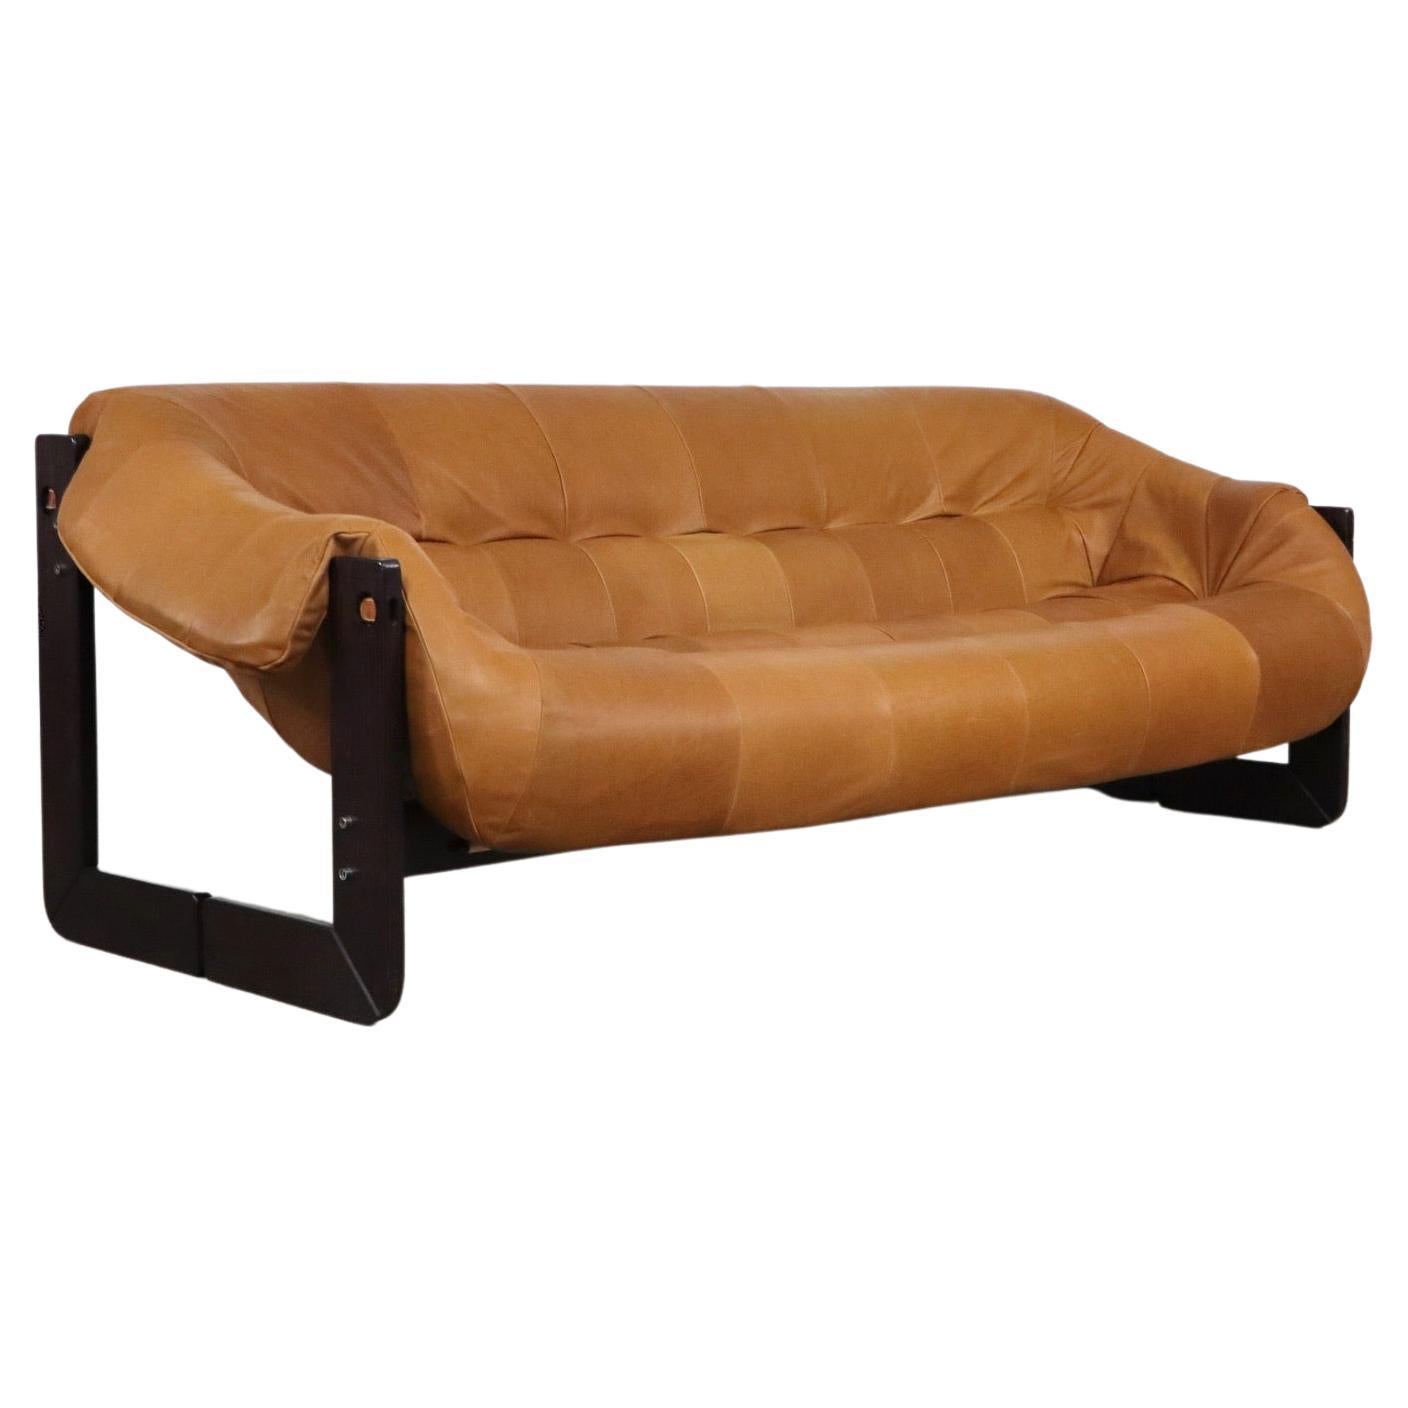 Percival Lafer MP-97 Sofa in cognac leather, 1960s For Sale